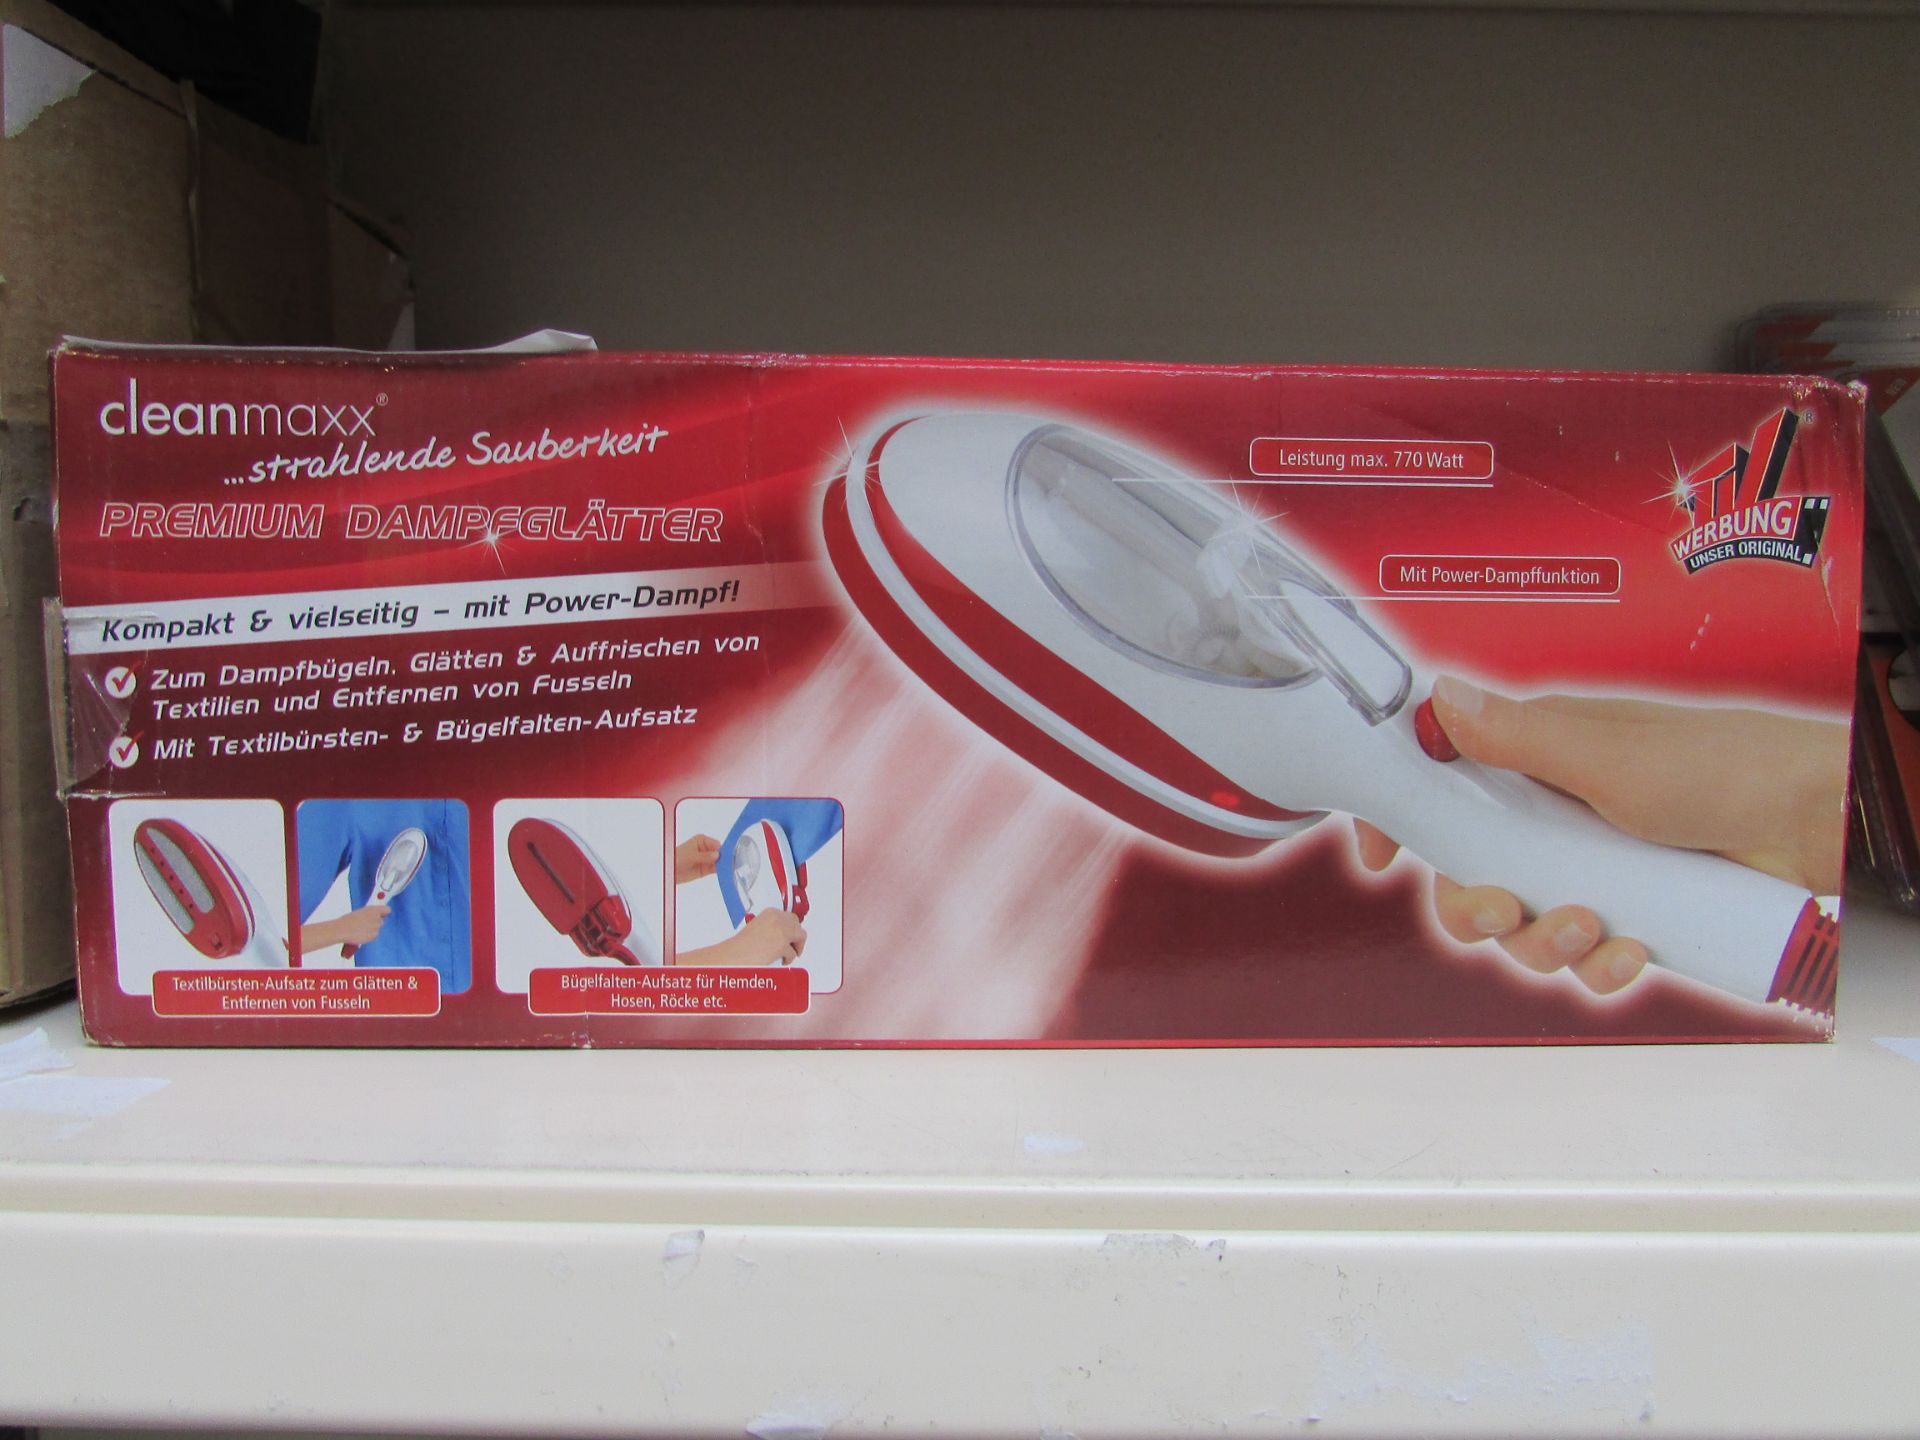 Cleanmax Clothes Hand Steamer & Iron